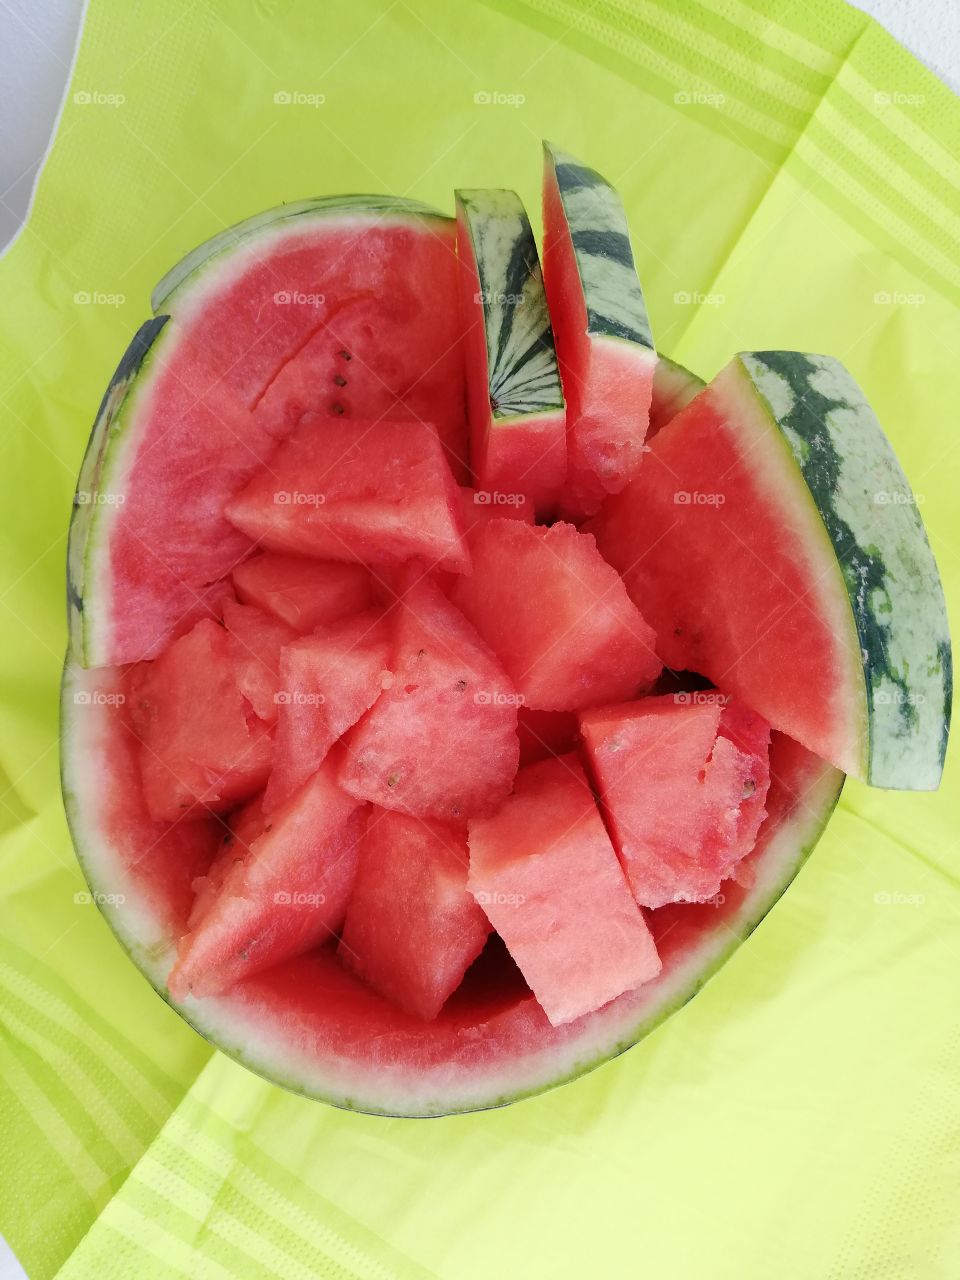 Half of a red juicy watermelon is full of sweet melon cubes and slices seeds inside. It is on the green striped napkin, which is wrinkled.